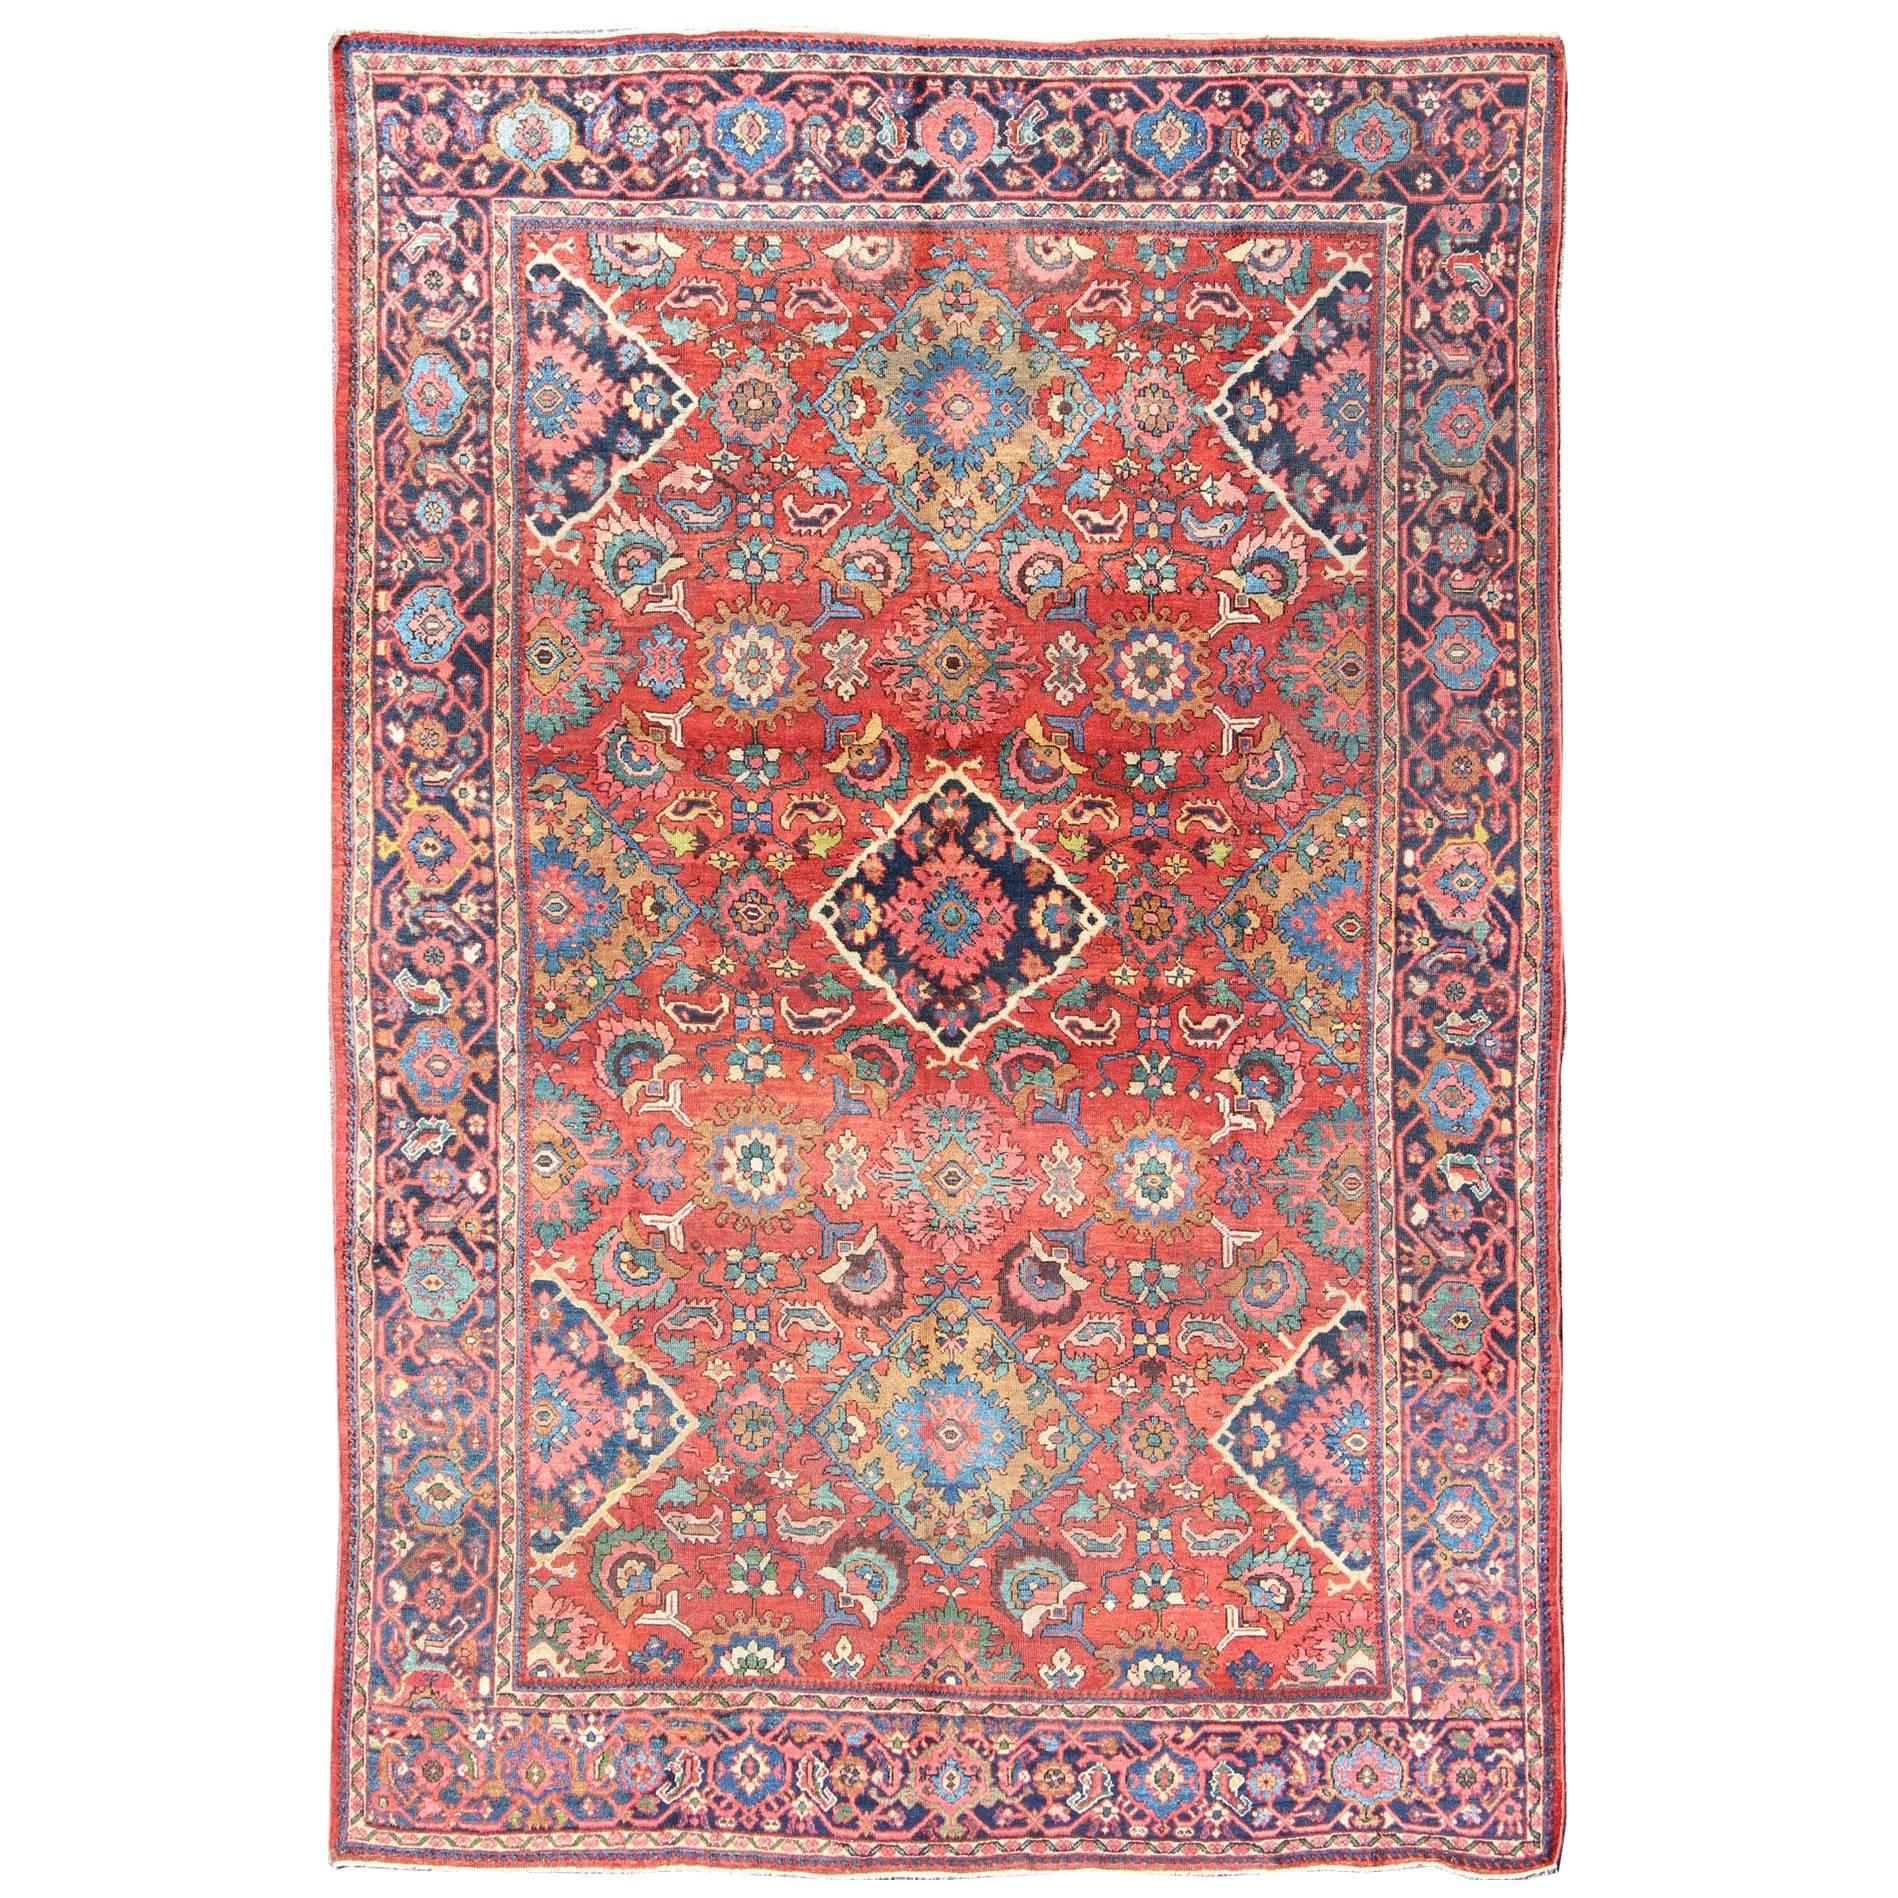 Antique Sultanabad Rug with All Over Diamond Medallions & Floral Motifs